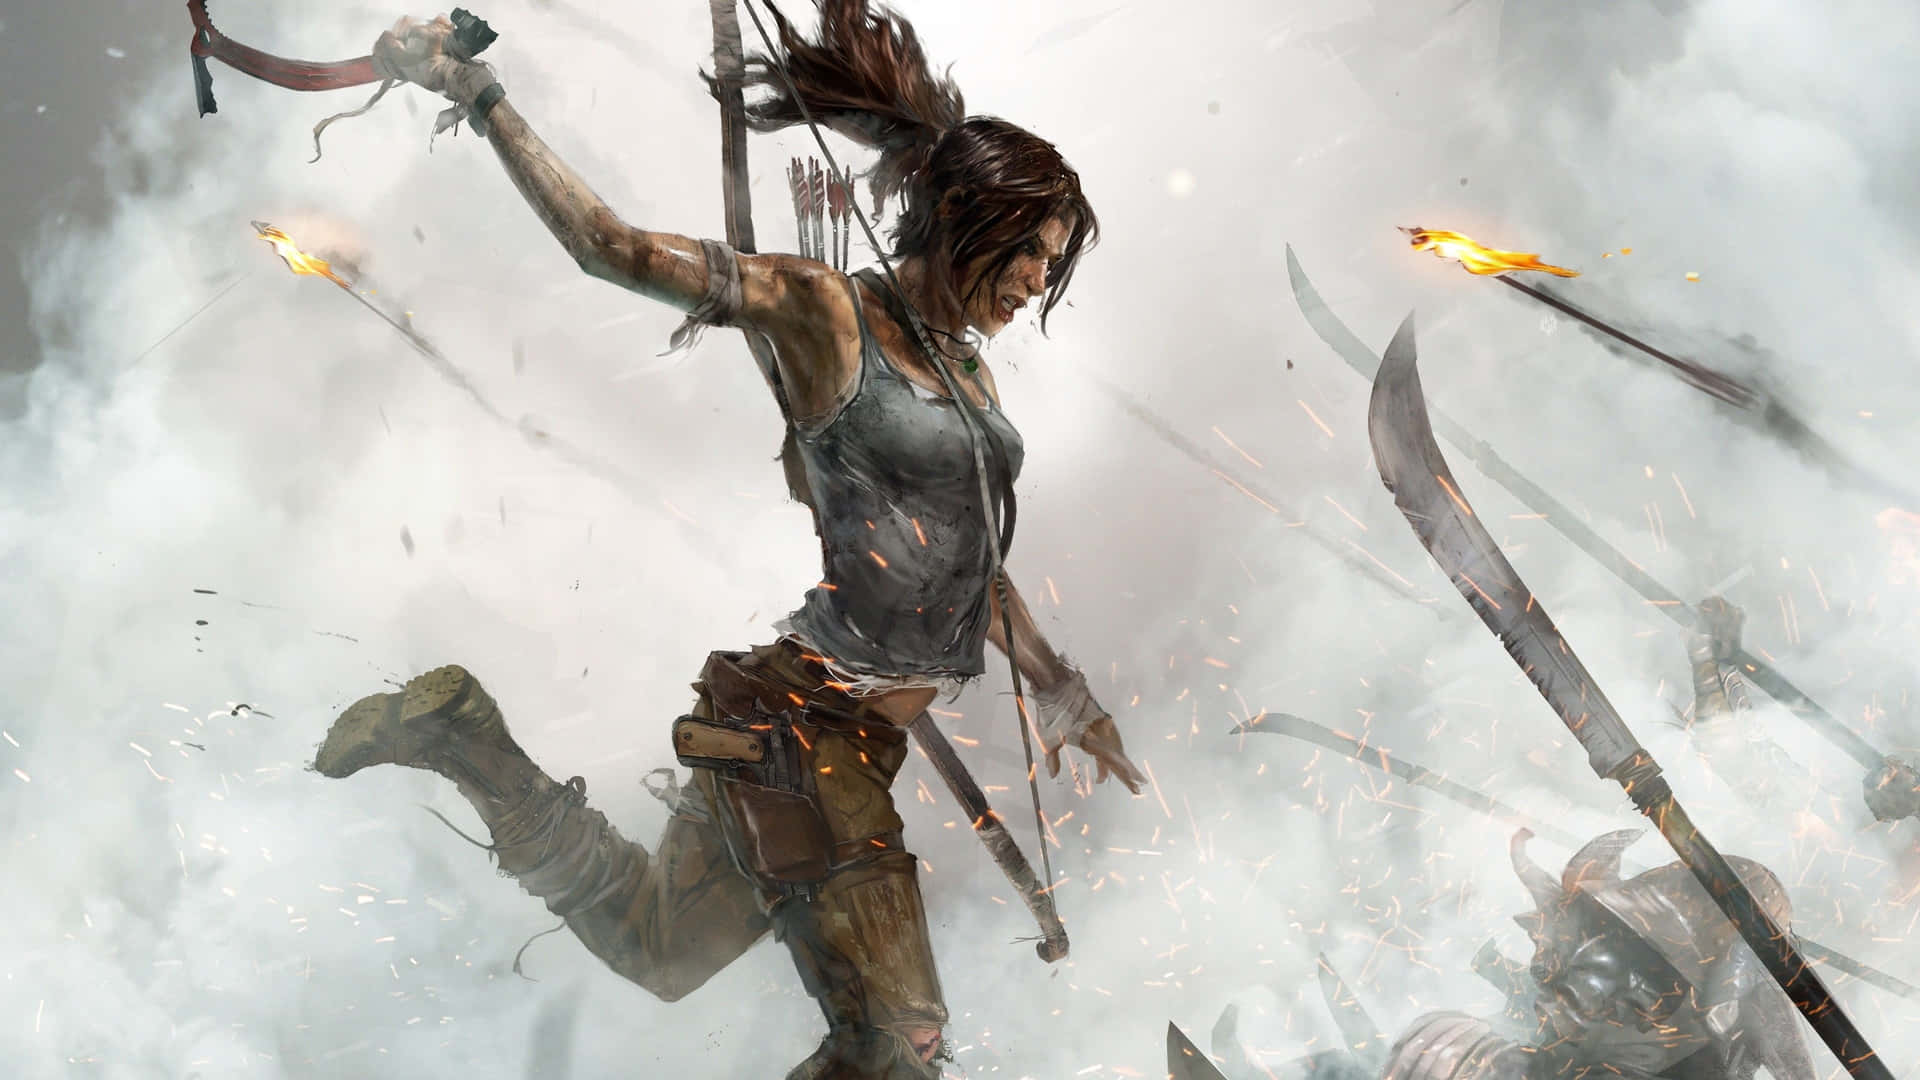 Experience the intensity of Lara Croft's journey in Shadow of the Tomb Raider